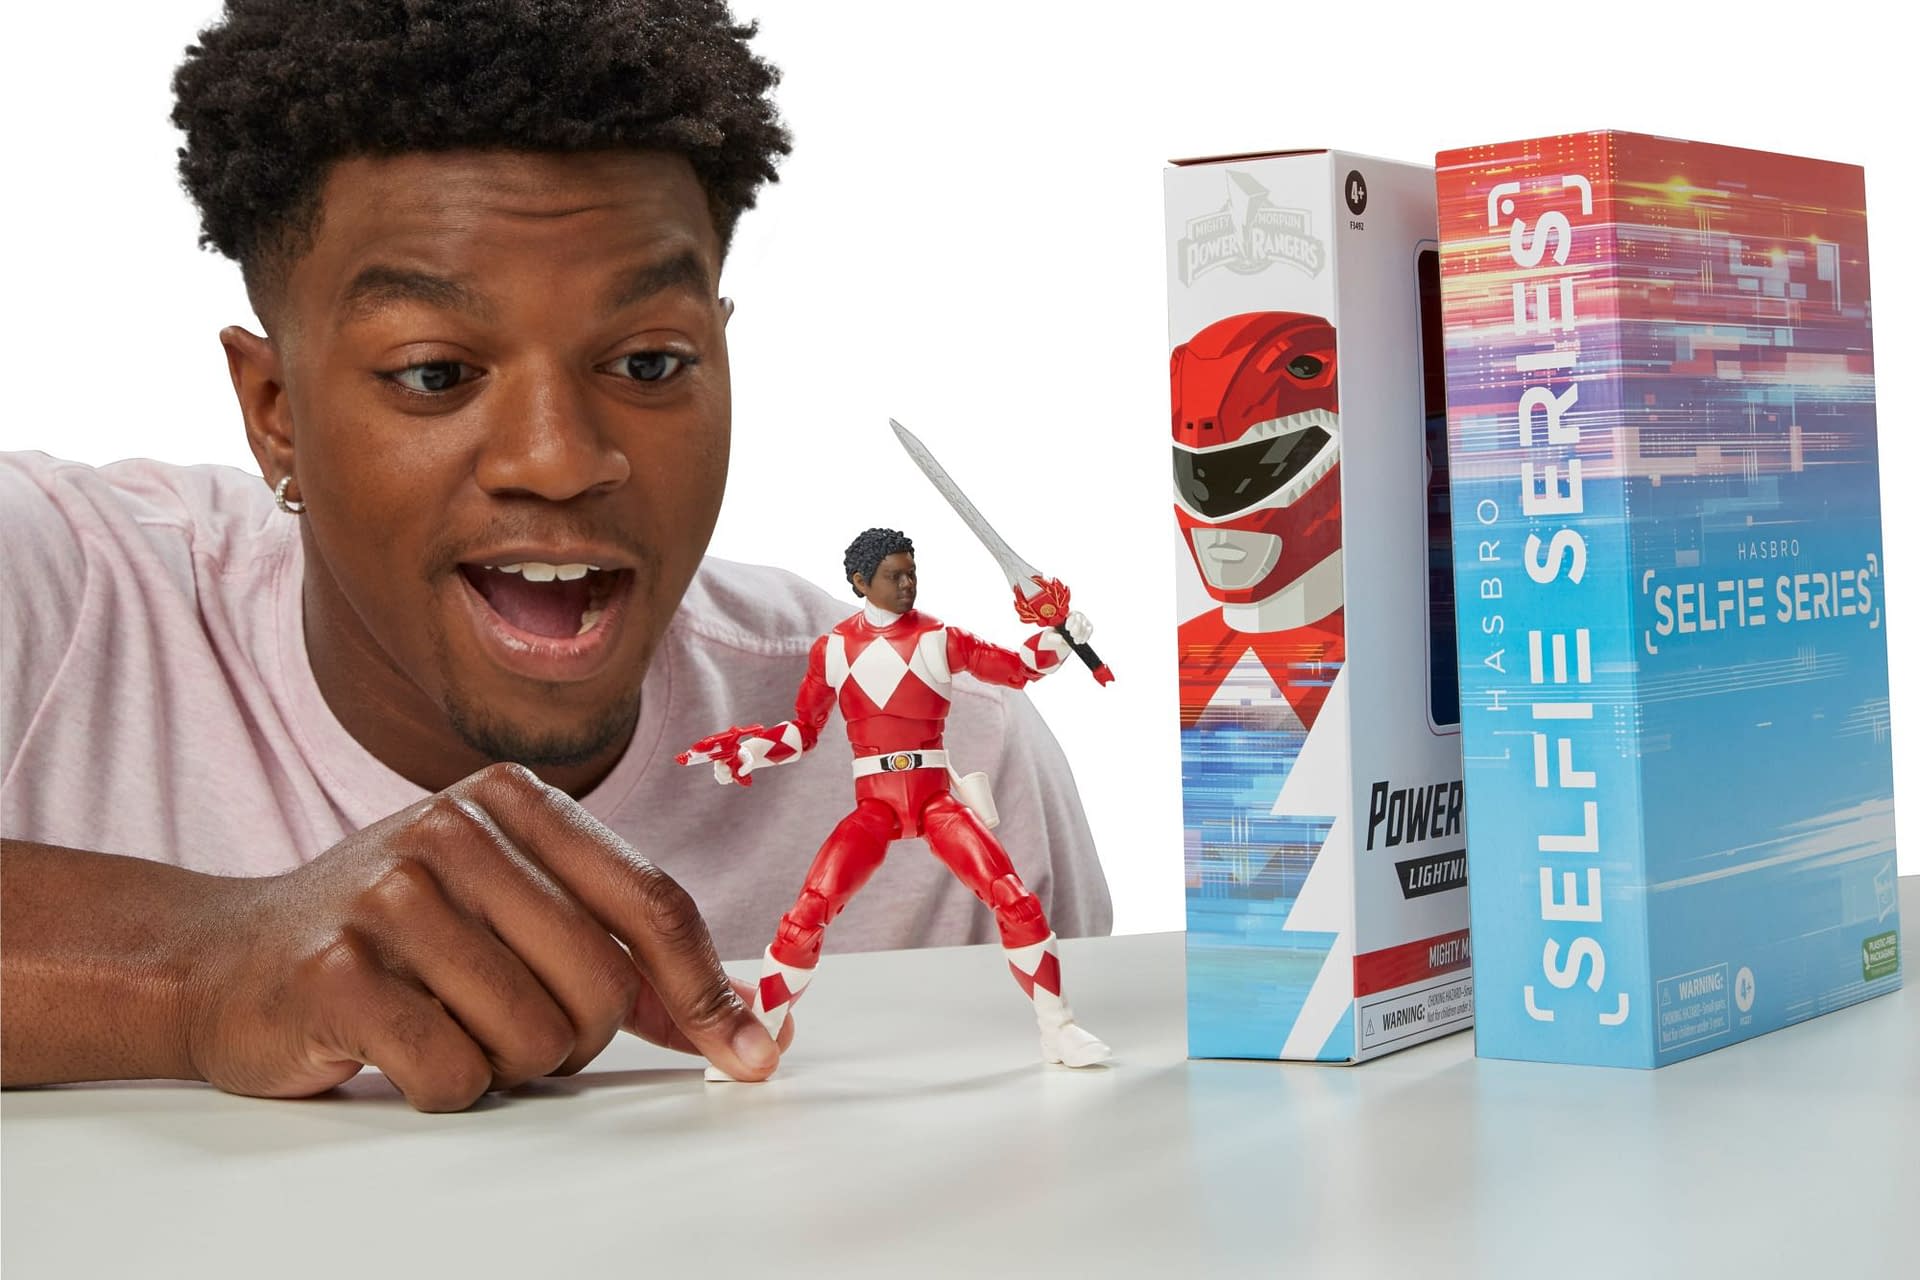 Customize Your Own Action Figure with Hasbro's Selfie Series